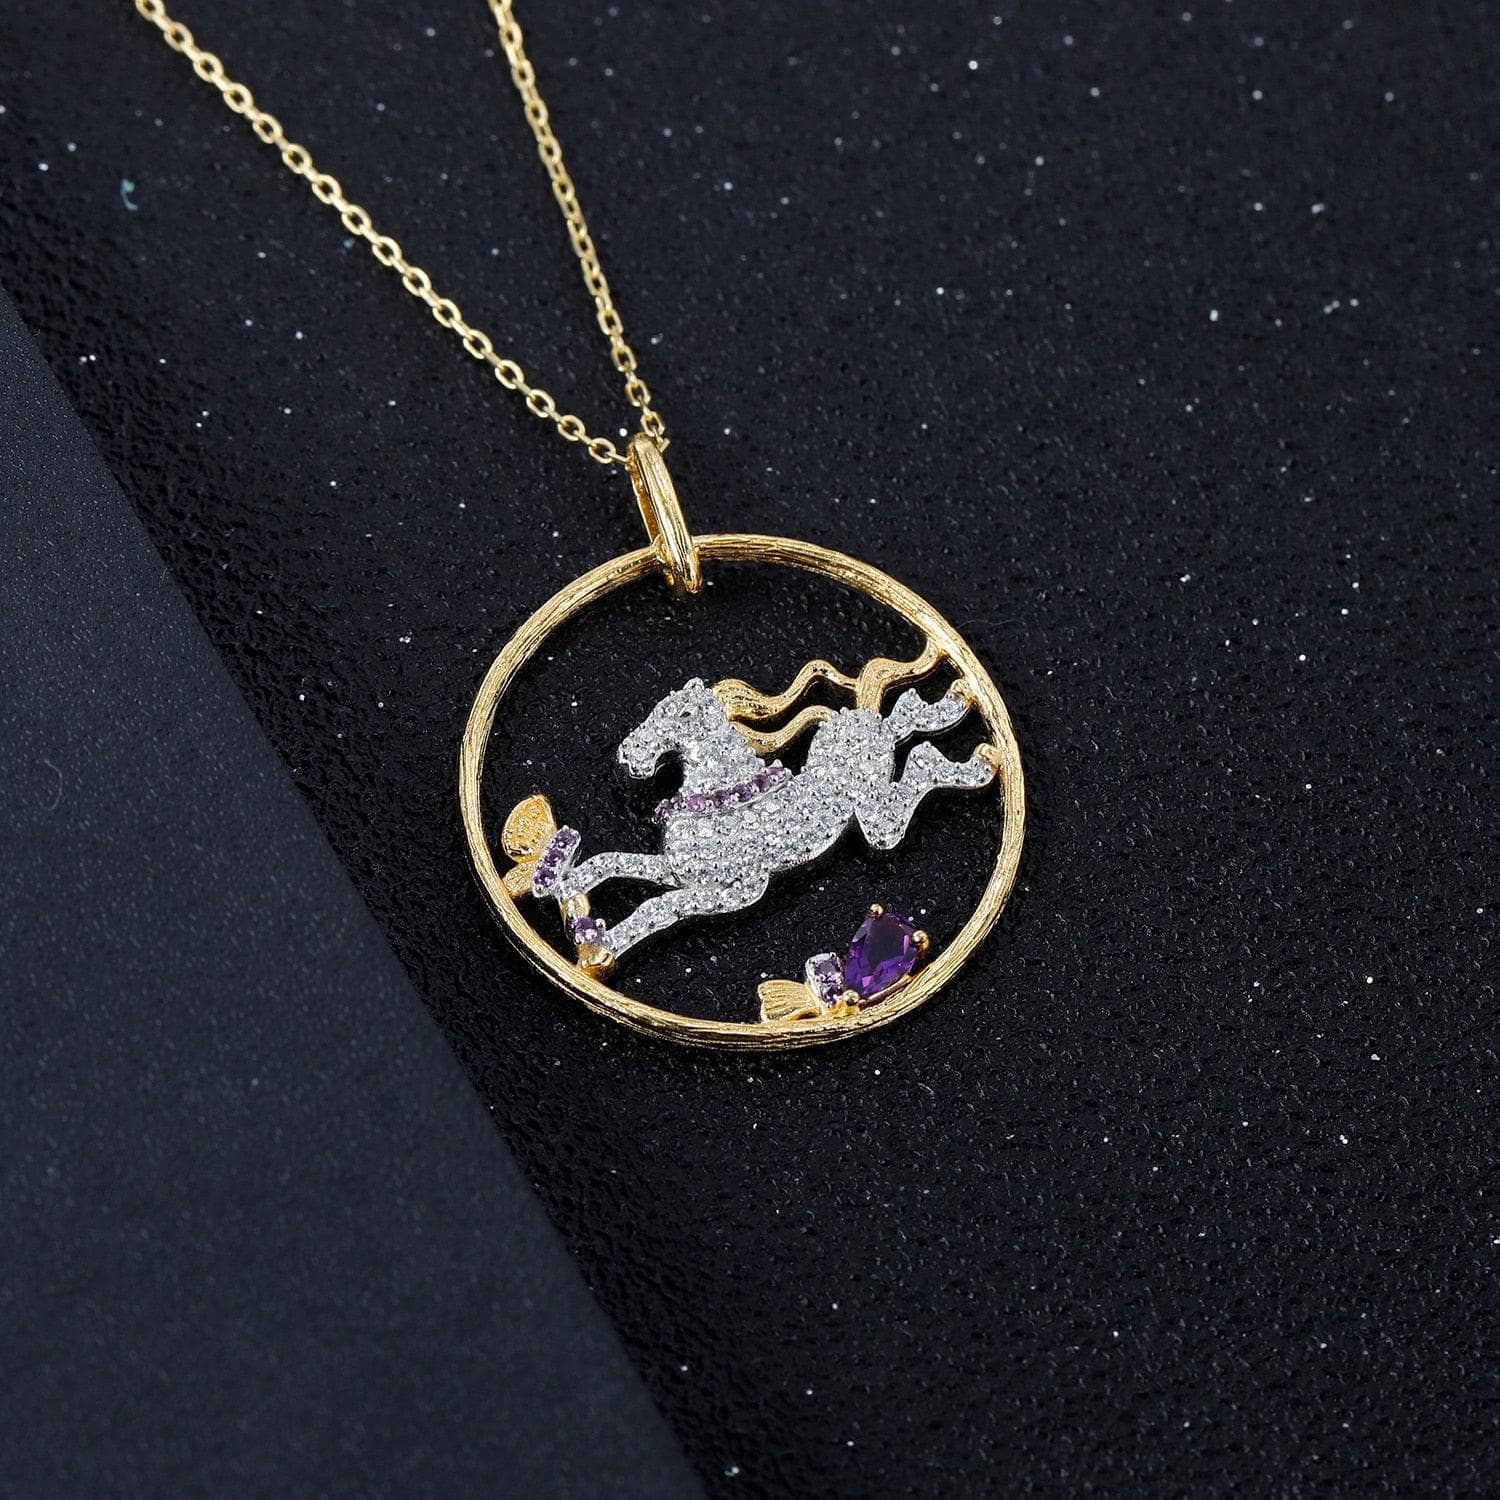 Year Of The Horse- Galloping Horse Natural Amethyst Necklace - Black Diamonds New York